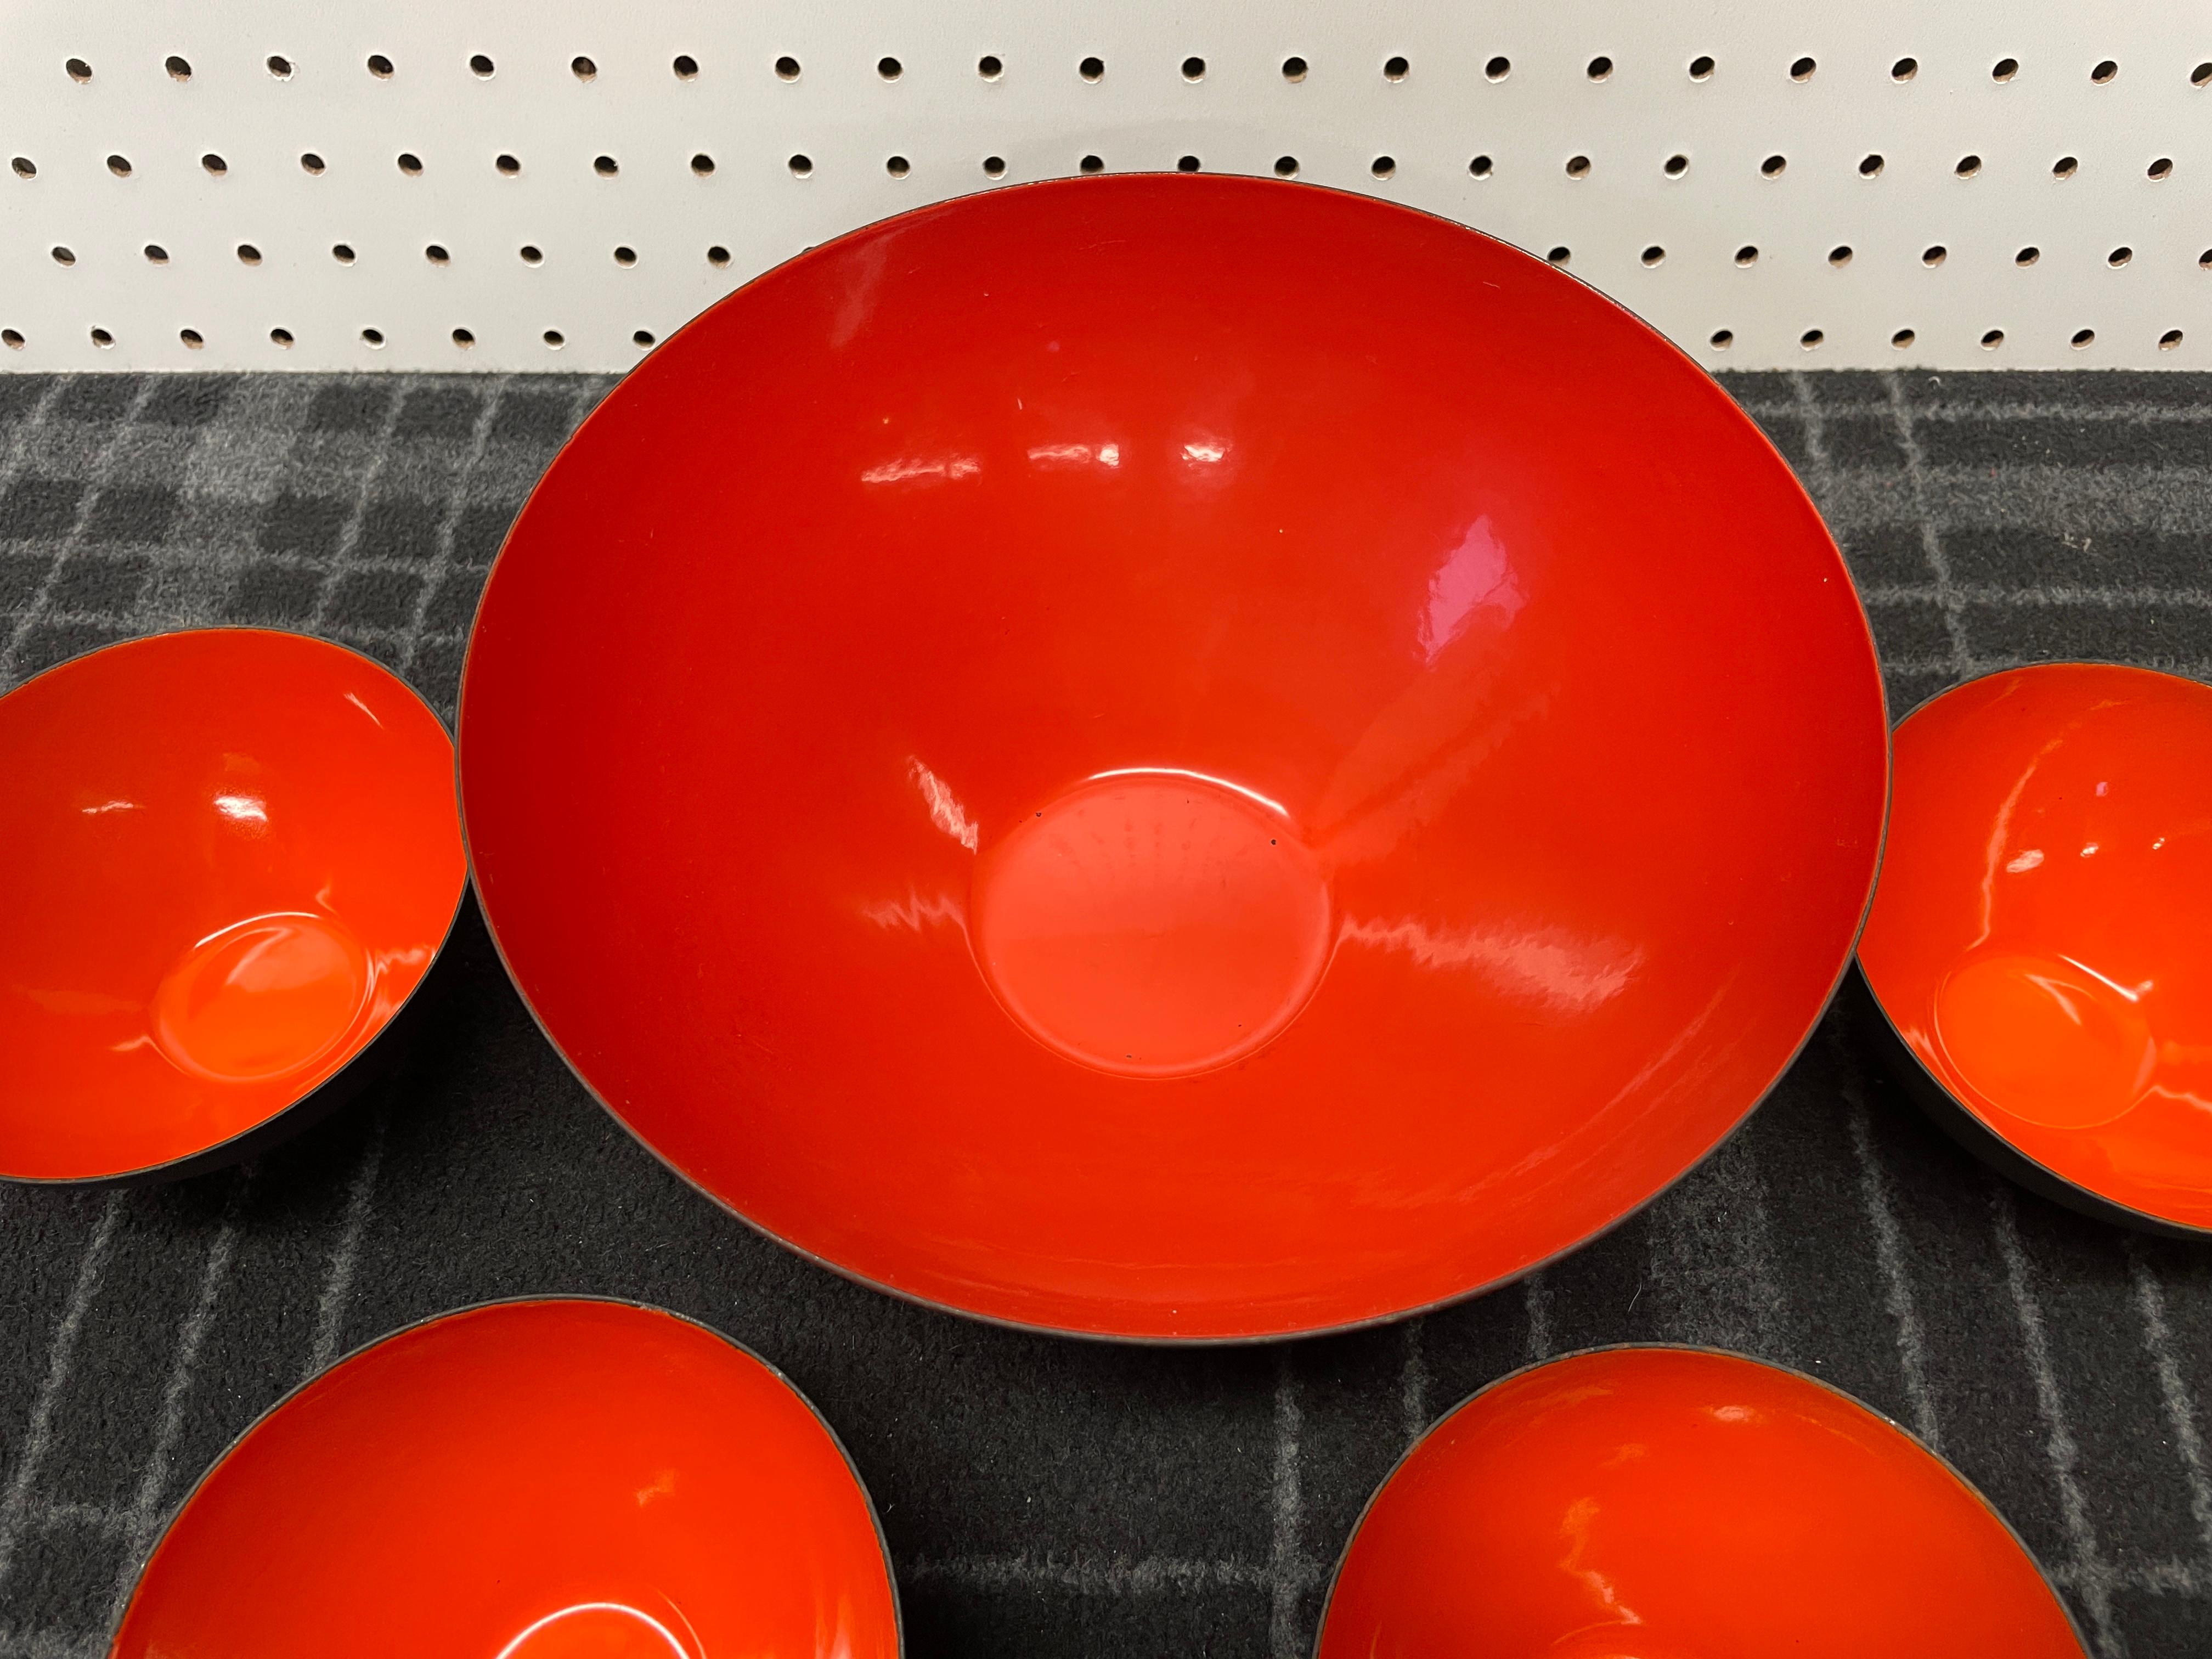 A stunning five piece set of Krenit enamel bowls designed by Herbert Krenchel. Includes four small bowls (4 3/4